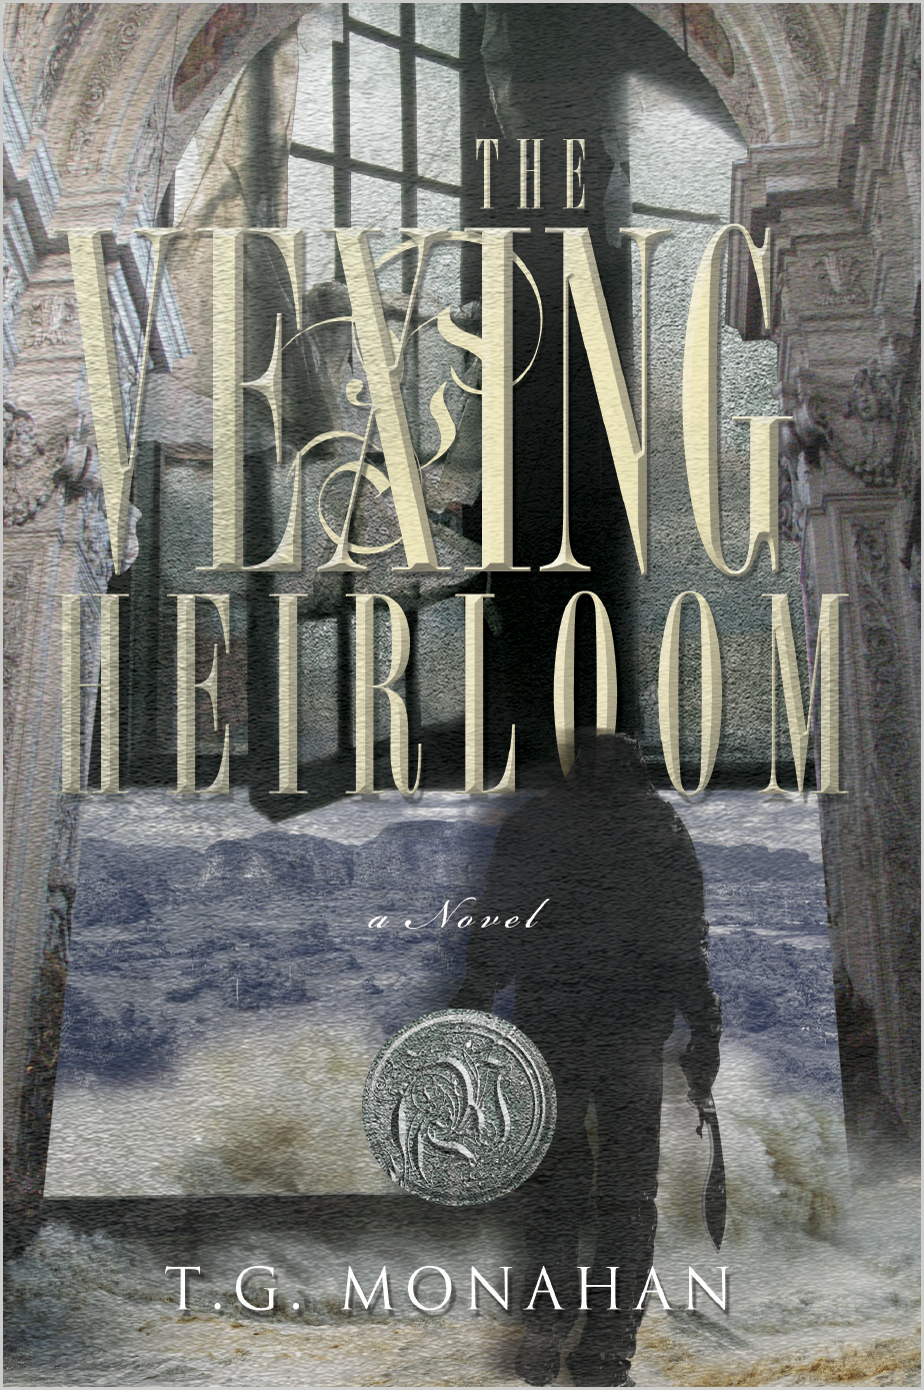 The Vexing Heirloom: A Novel